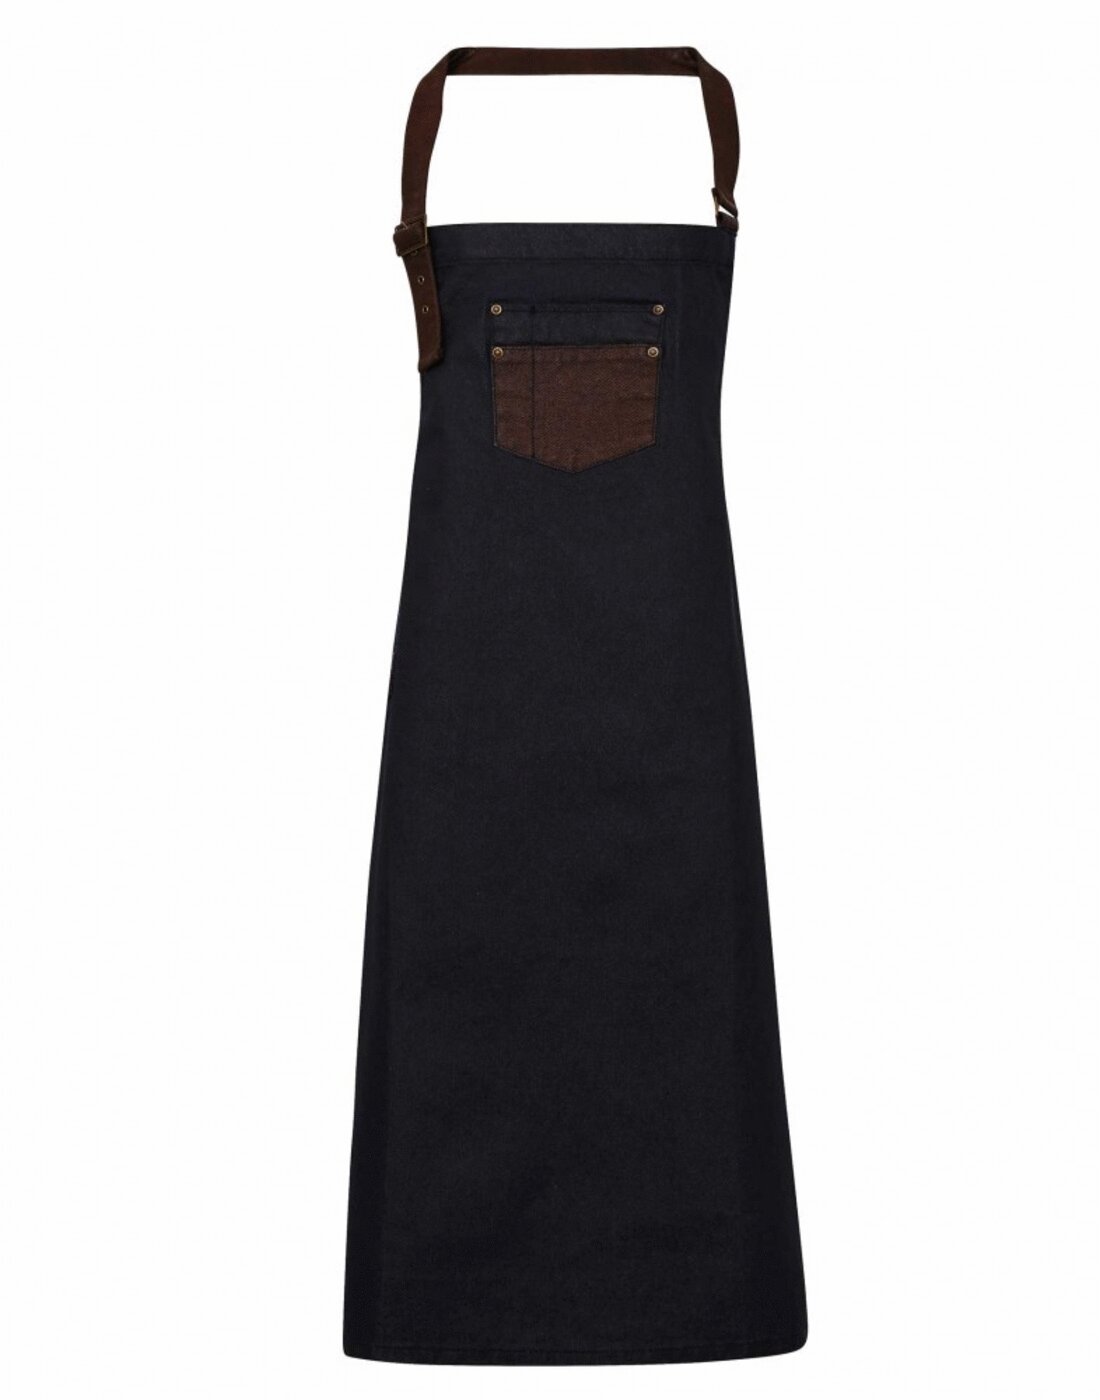 Premier 'Division' Waxed Look Denim Bib Apron with Faux leather